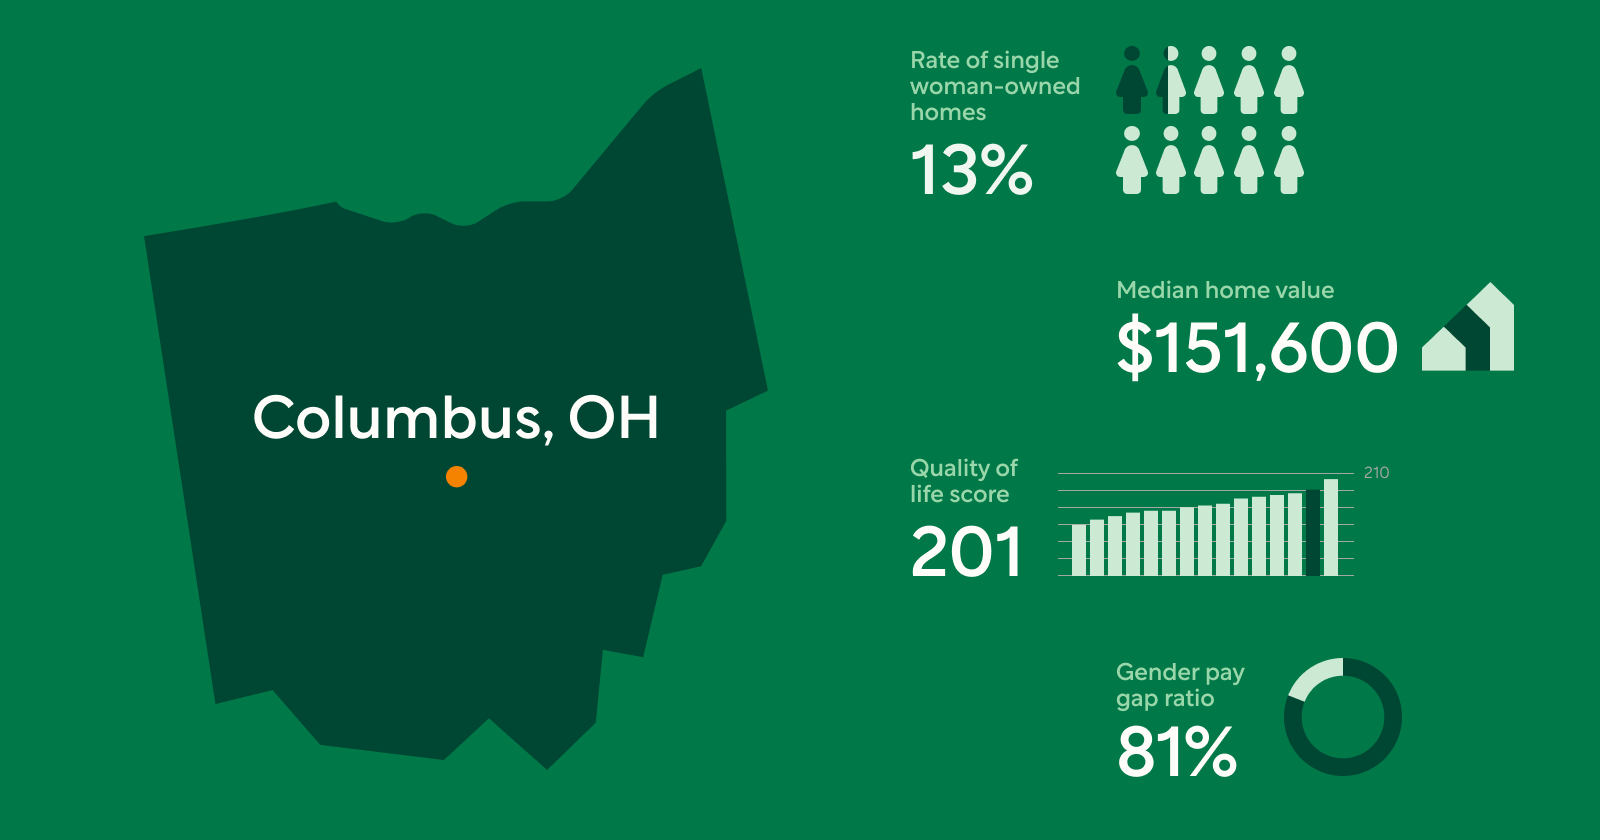 Stylized Image of Facts and Figures on Columbus, OH - One of the Best Cities for Single Women Homeowners